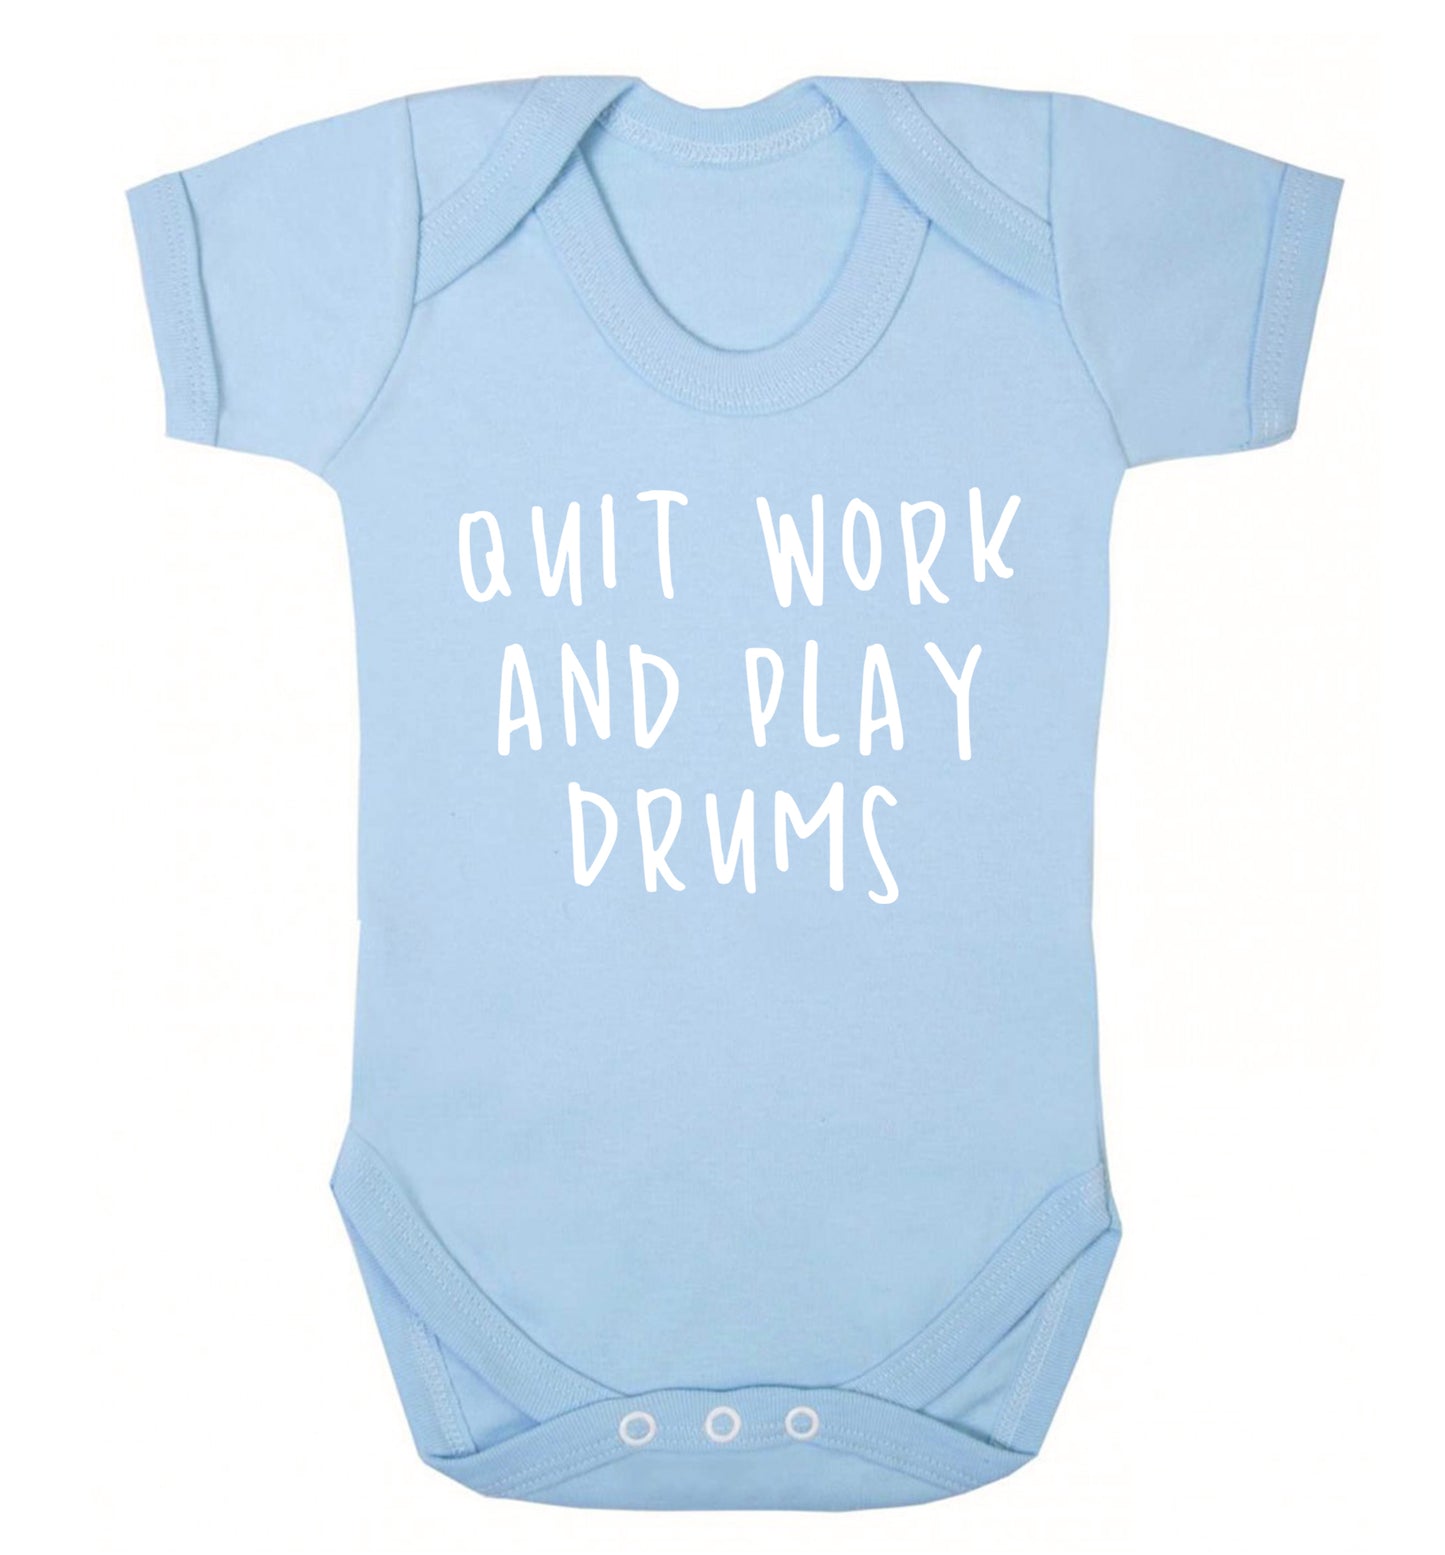 Quit work and play drums Baby Vest pale blue 18-24 months